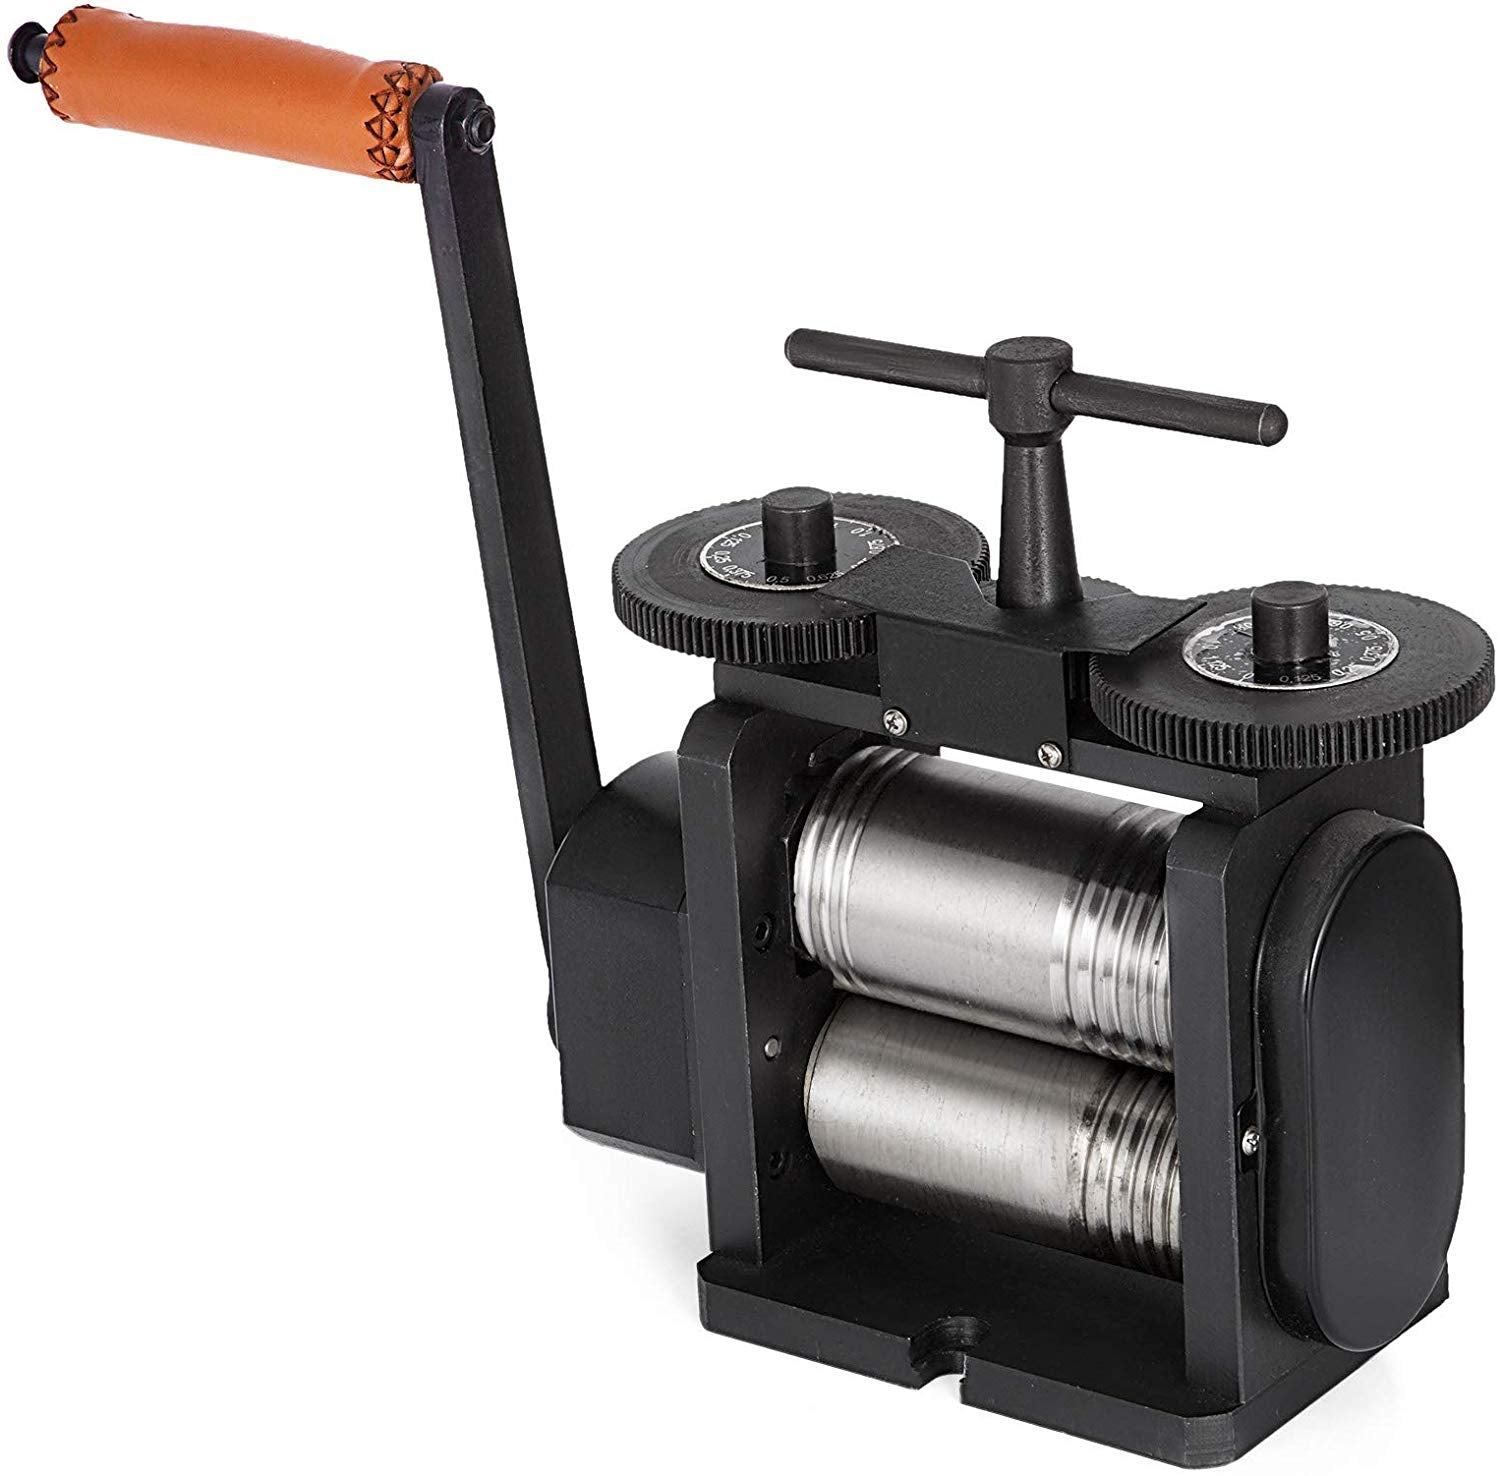 Stainless Steel Eagle Hand Powered Rolling Mill for Jewelry Roll